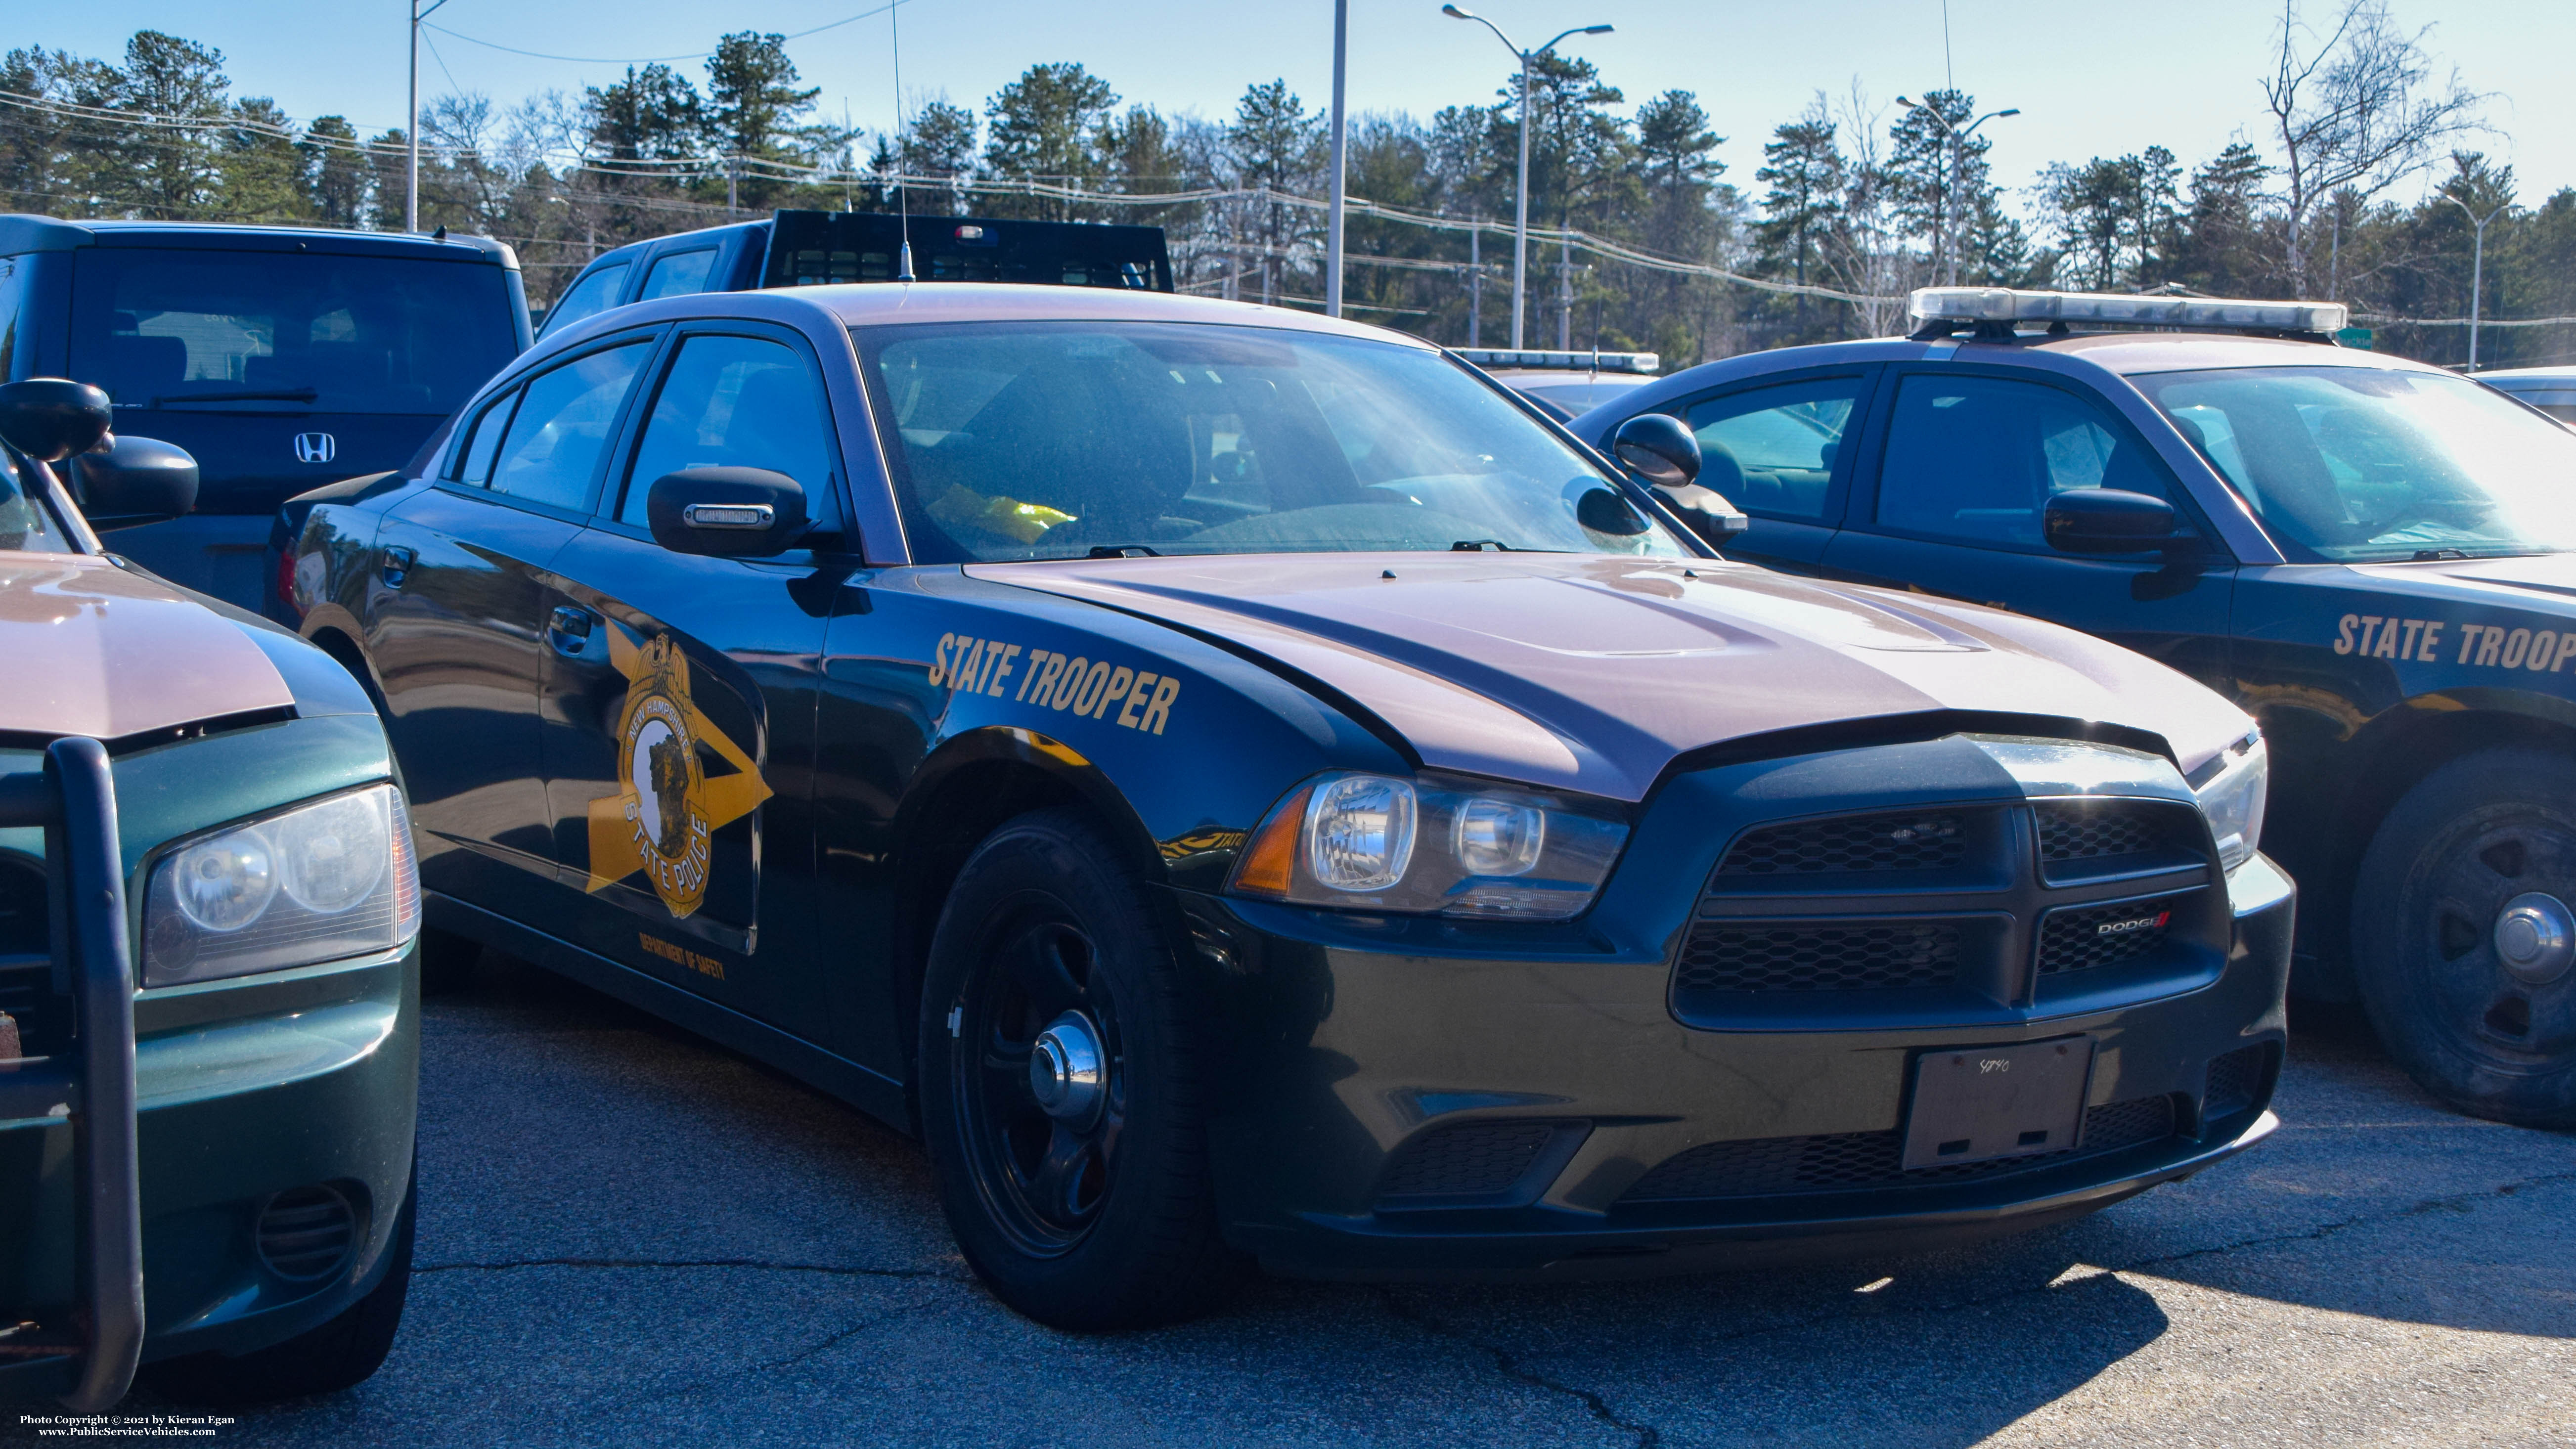 A photo  of New Hampshire State Police
            Unassigned Cruiser, a 2011-2014 Dodge Charger             taken by Kieran Egan